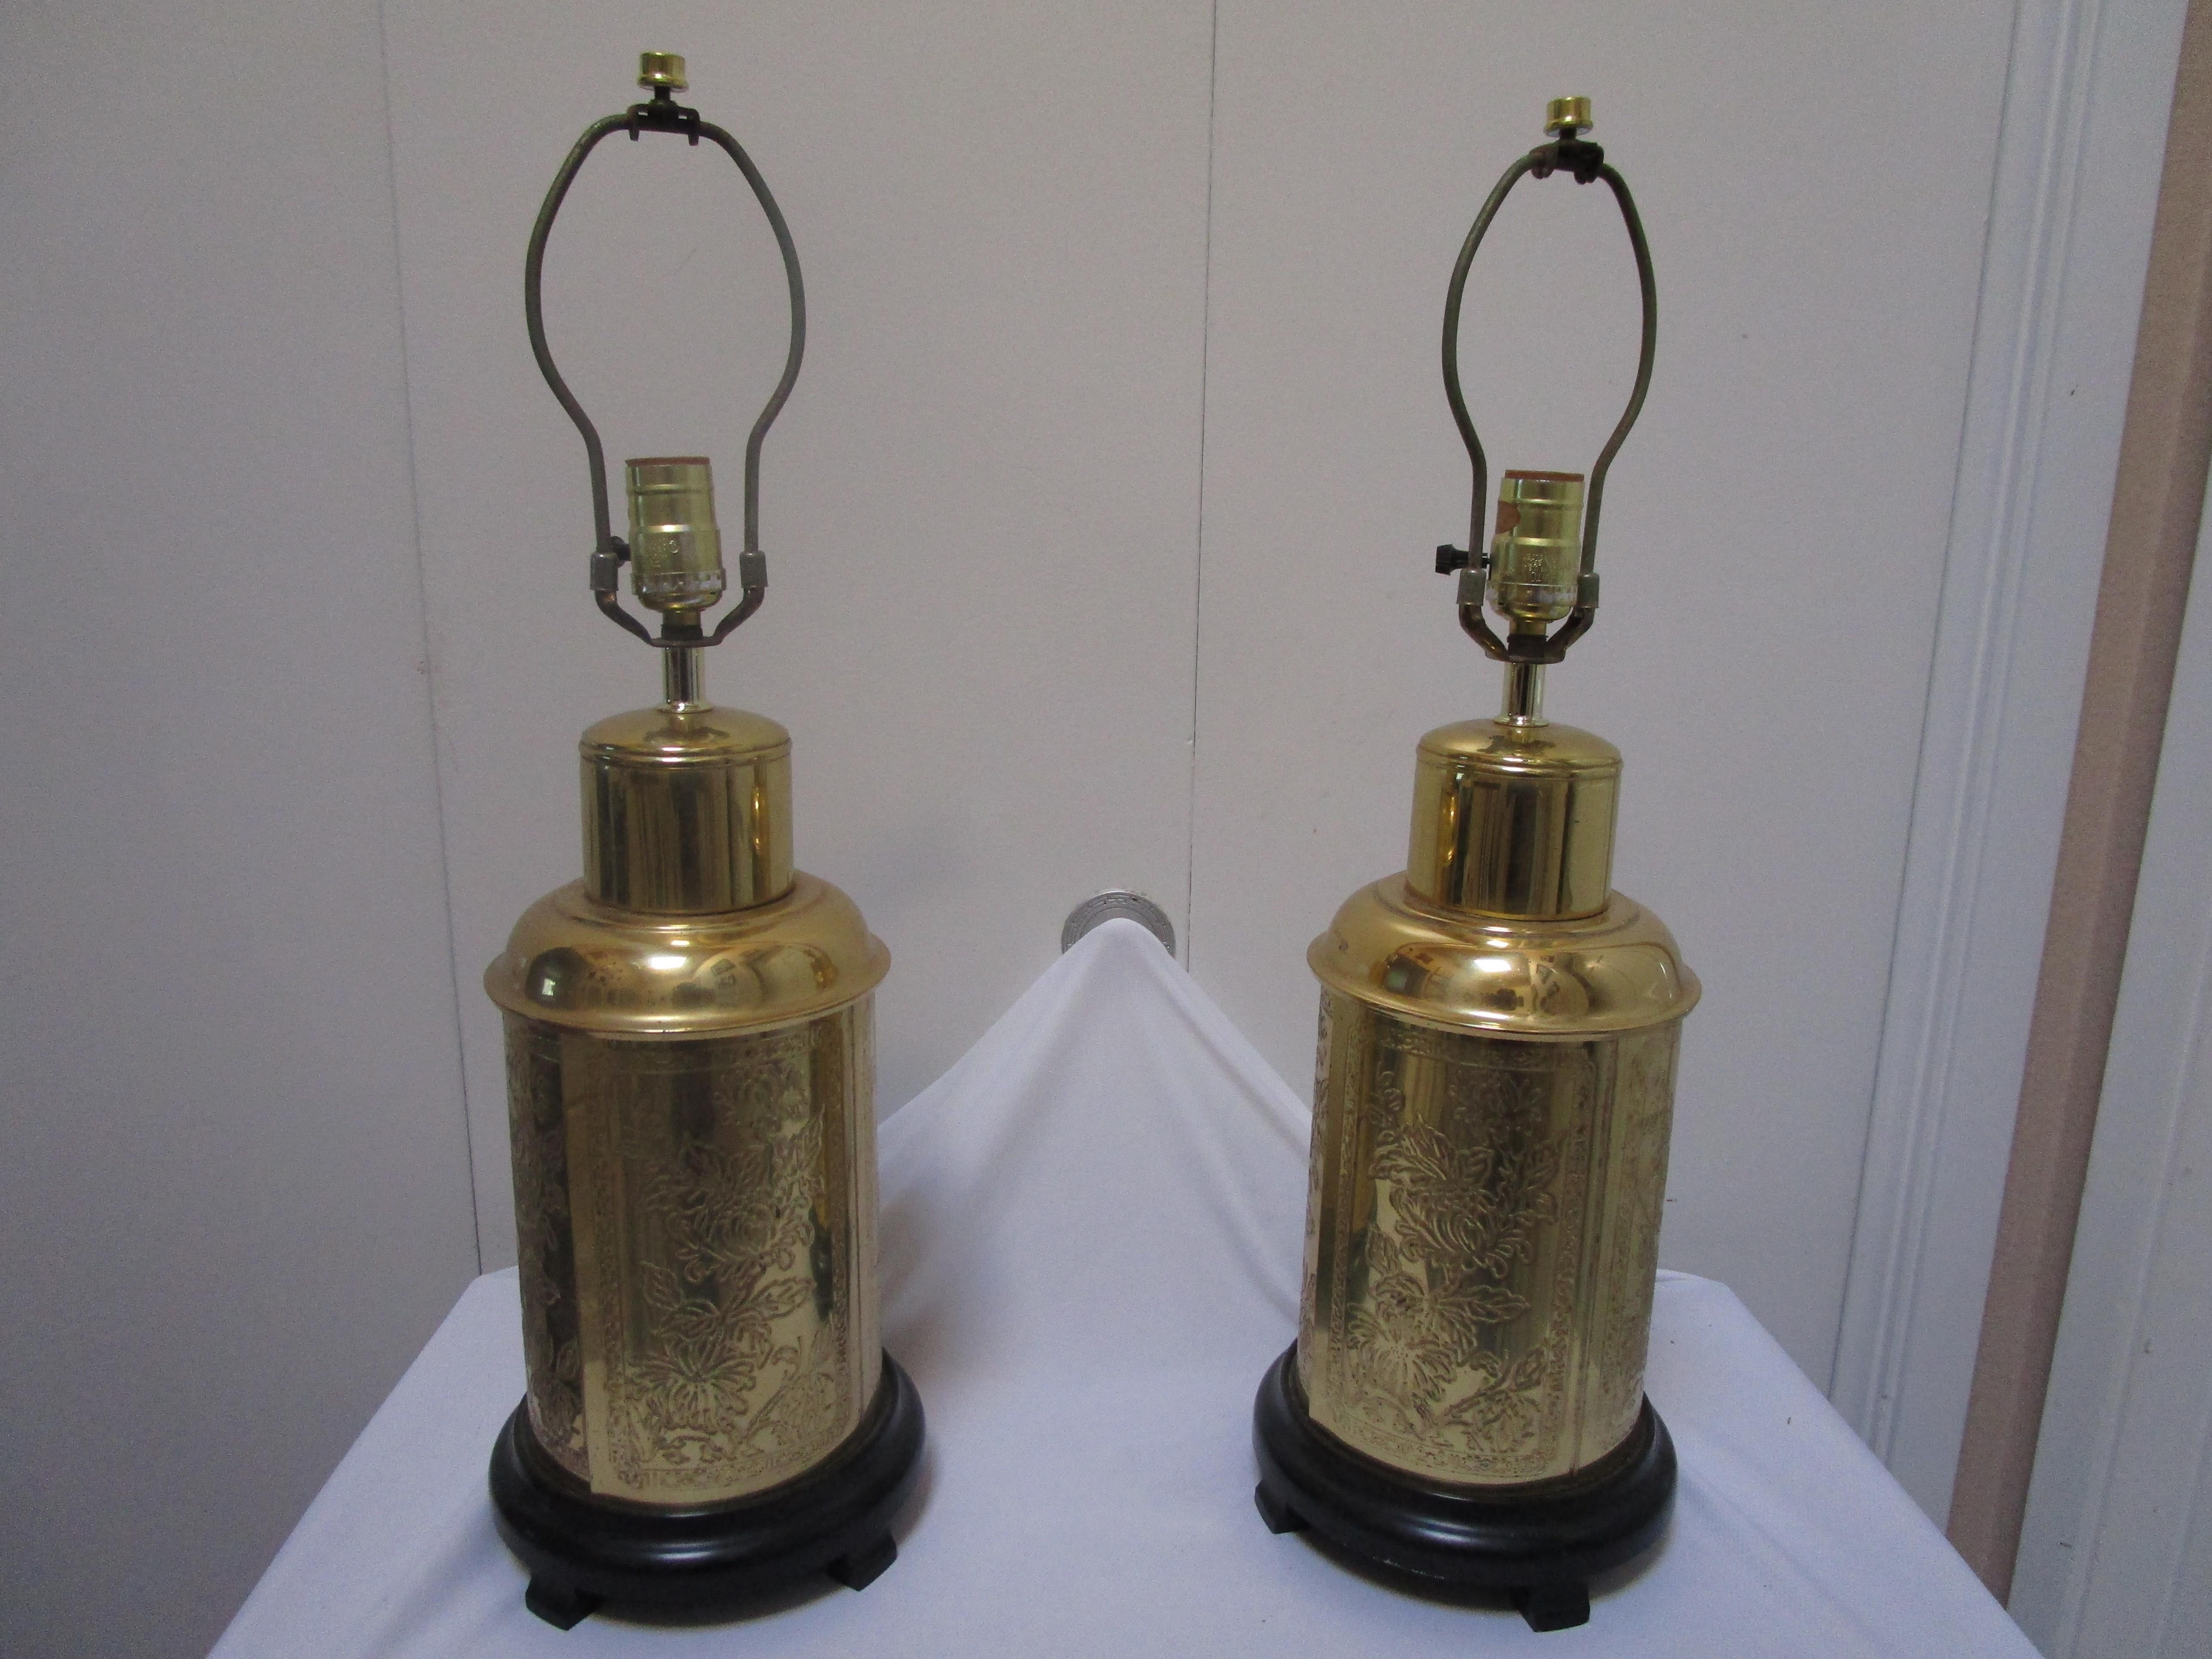 Fredrick Cooper's beautiful styling on brass with etched designs on the surface of this pair of Hollywood Regency lamps create a lighting standout. They will enhance many design settings in an office or home. The lamps are themed as tea caddy shapes